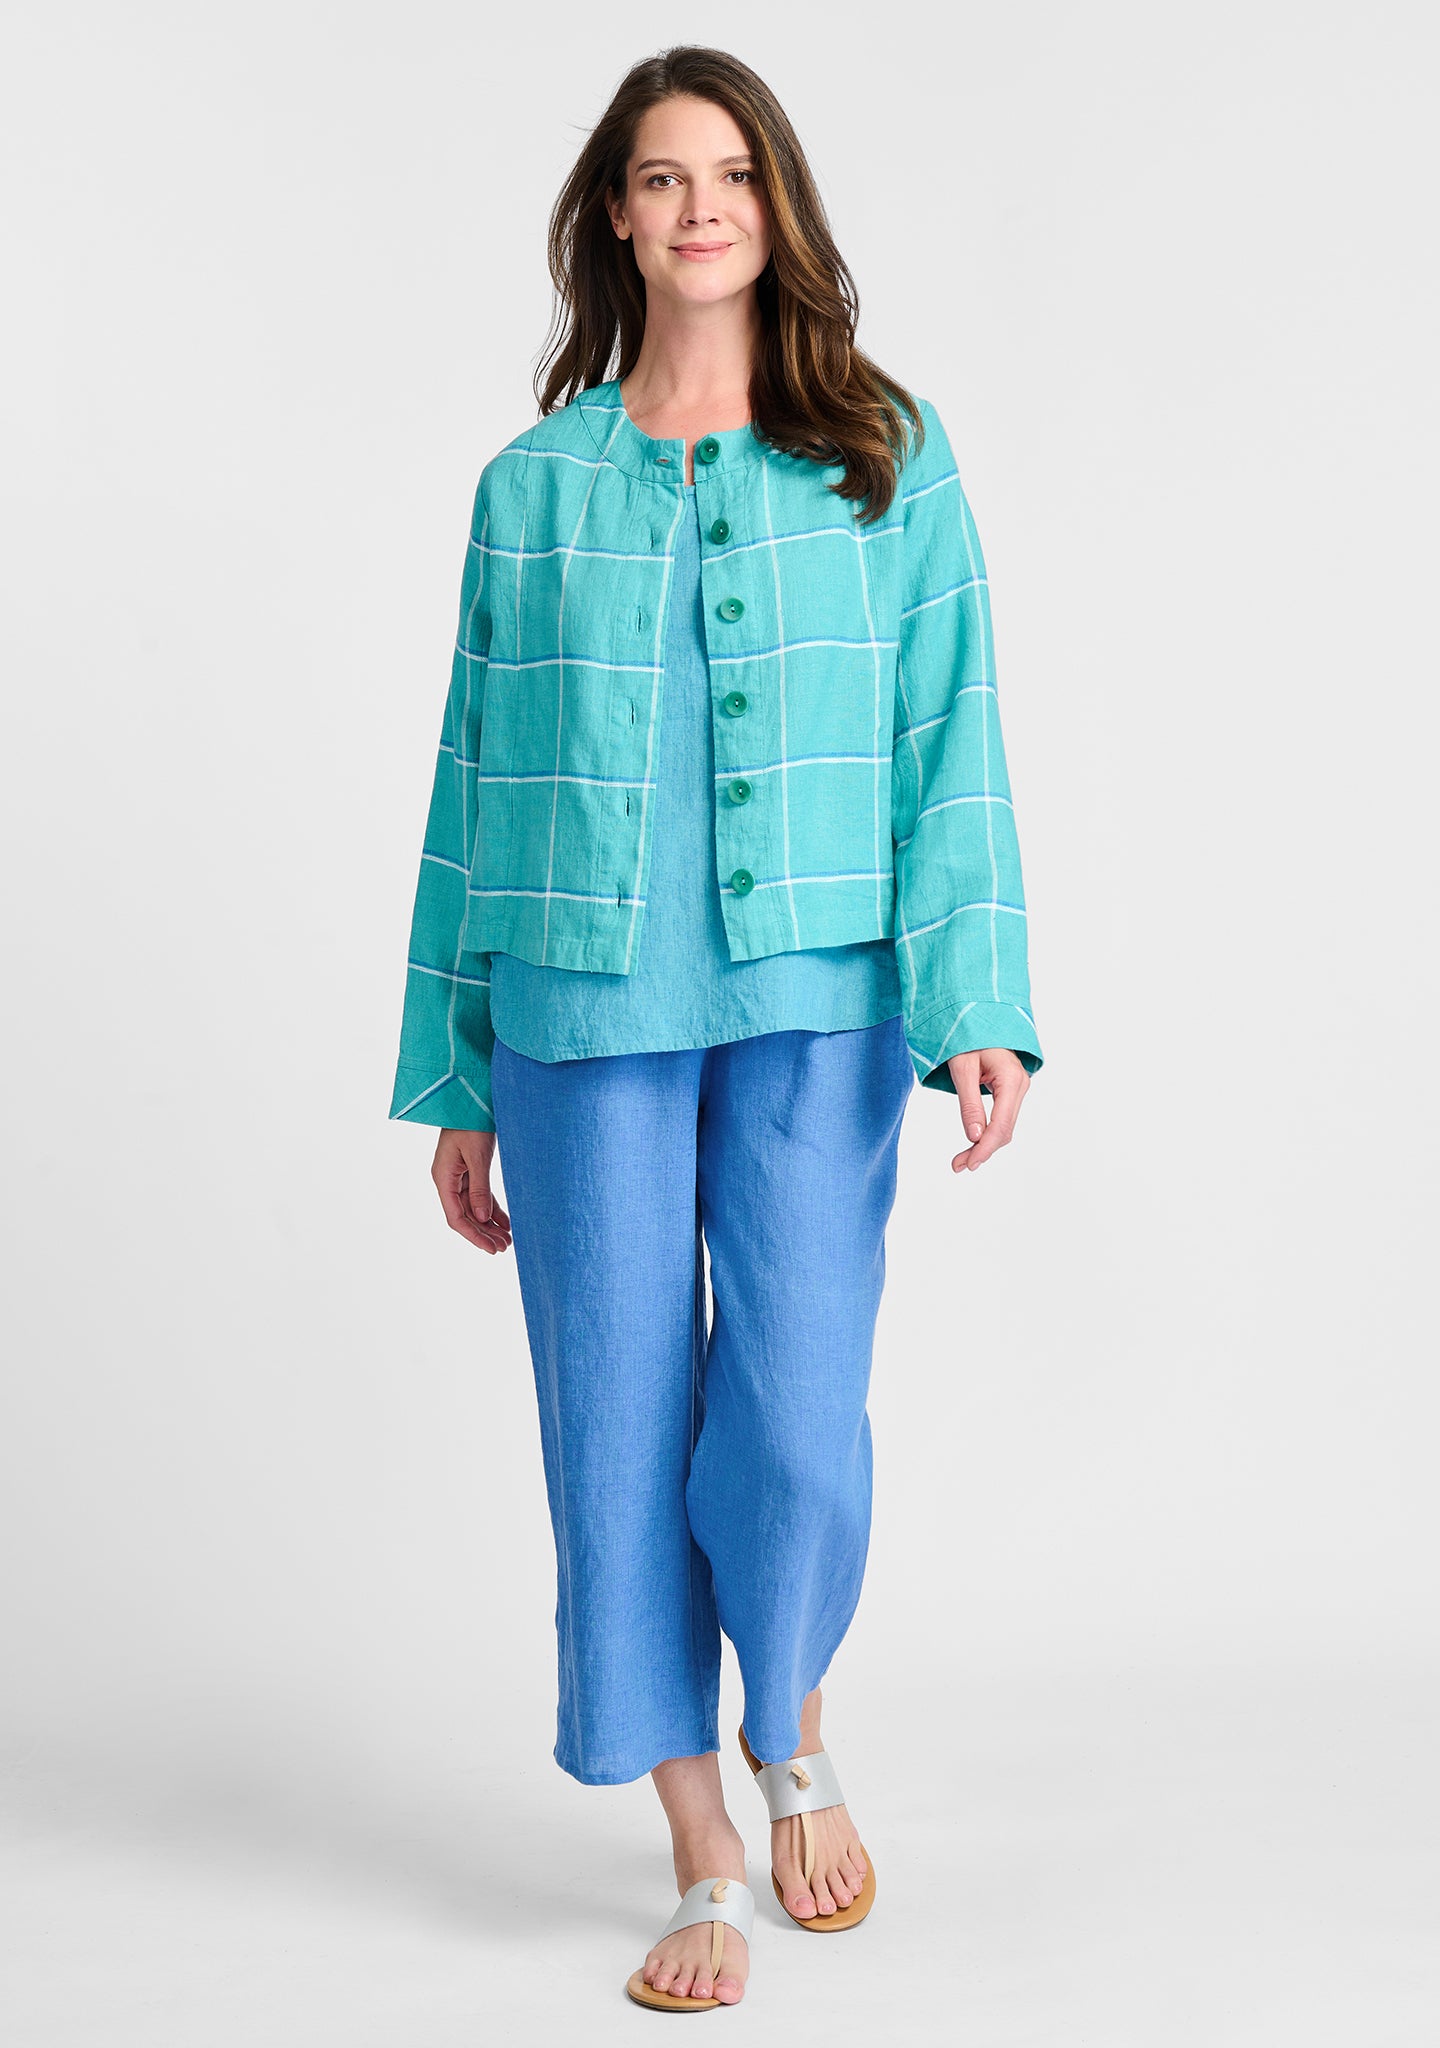 FLAX linen jacket in blue with linen tank in blue and linen pants in blue